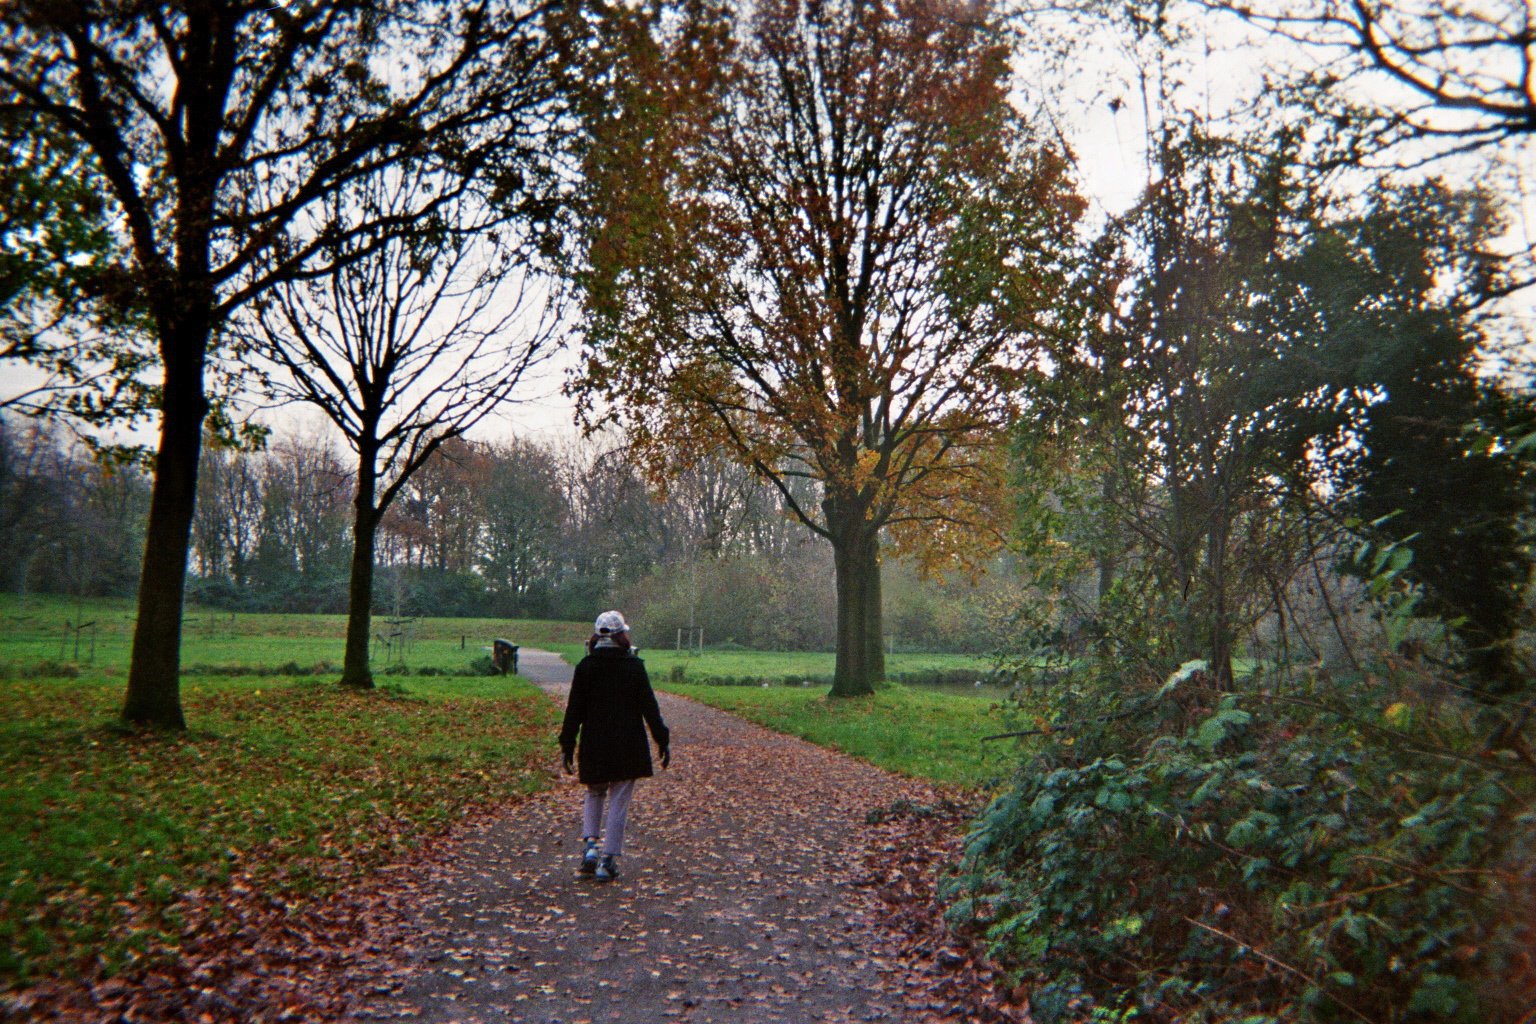 A woman walking in a park, it's autumn and brown leaves covers the walk path.